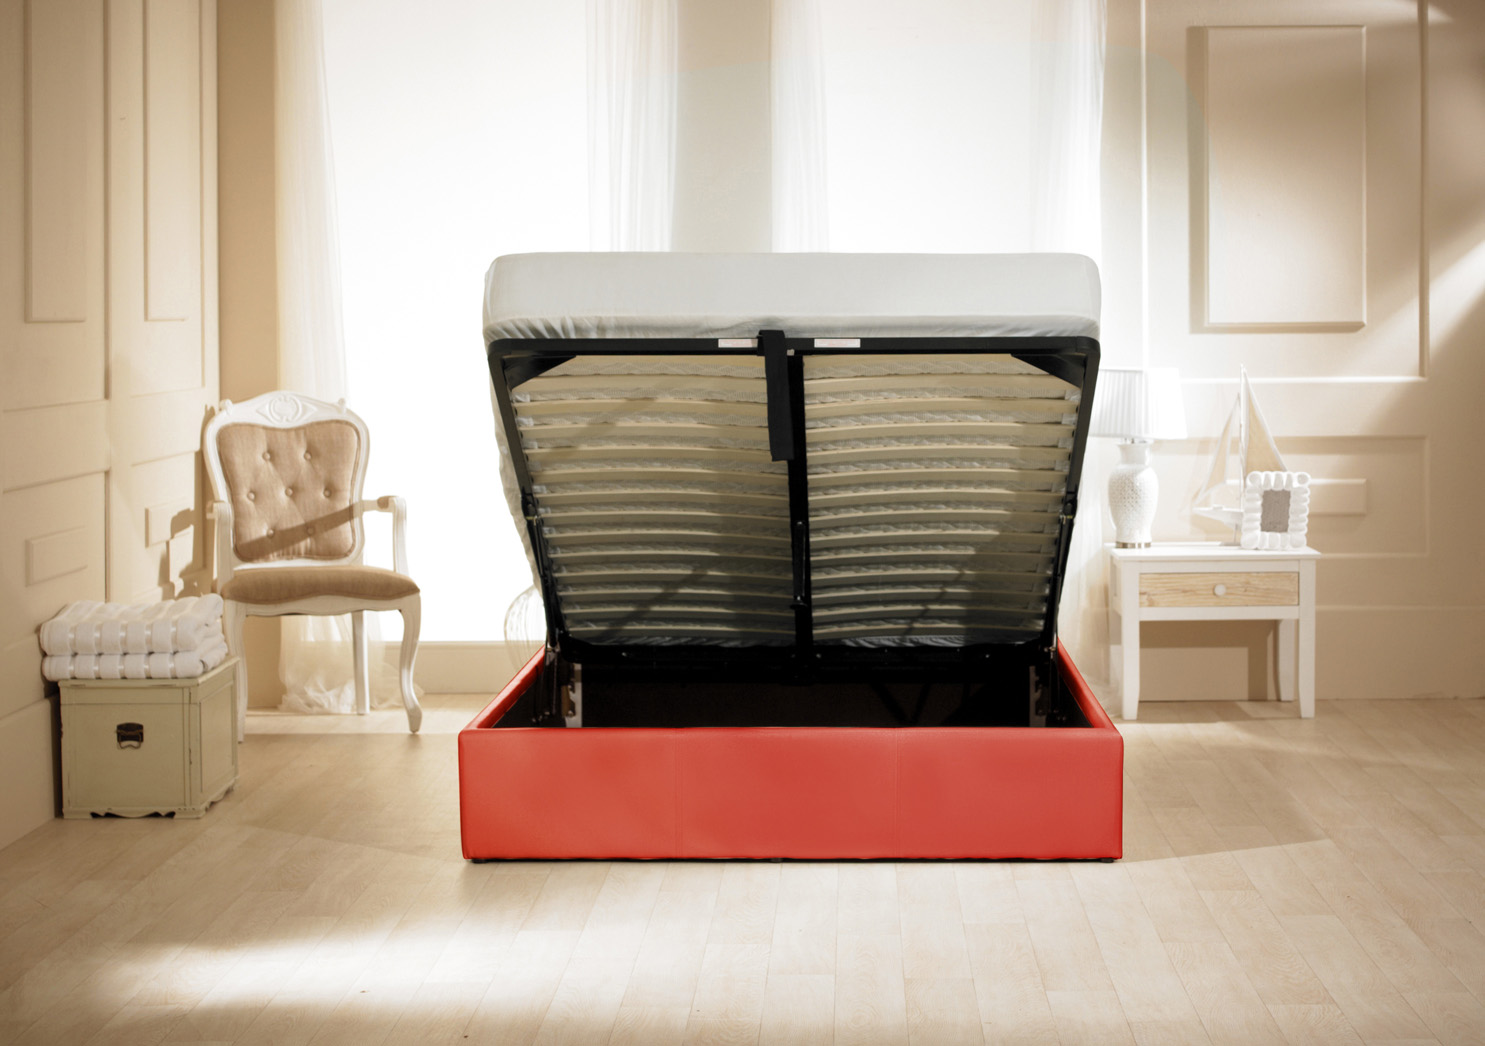 Emporia Beds Madrid Ottoman in Red Double